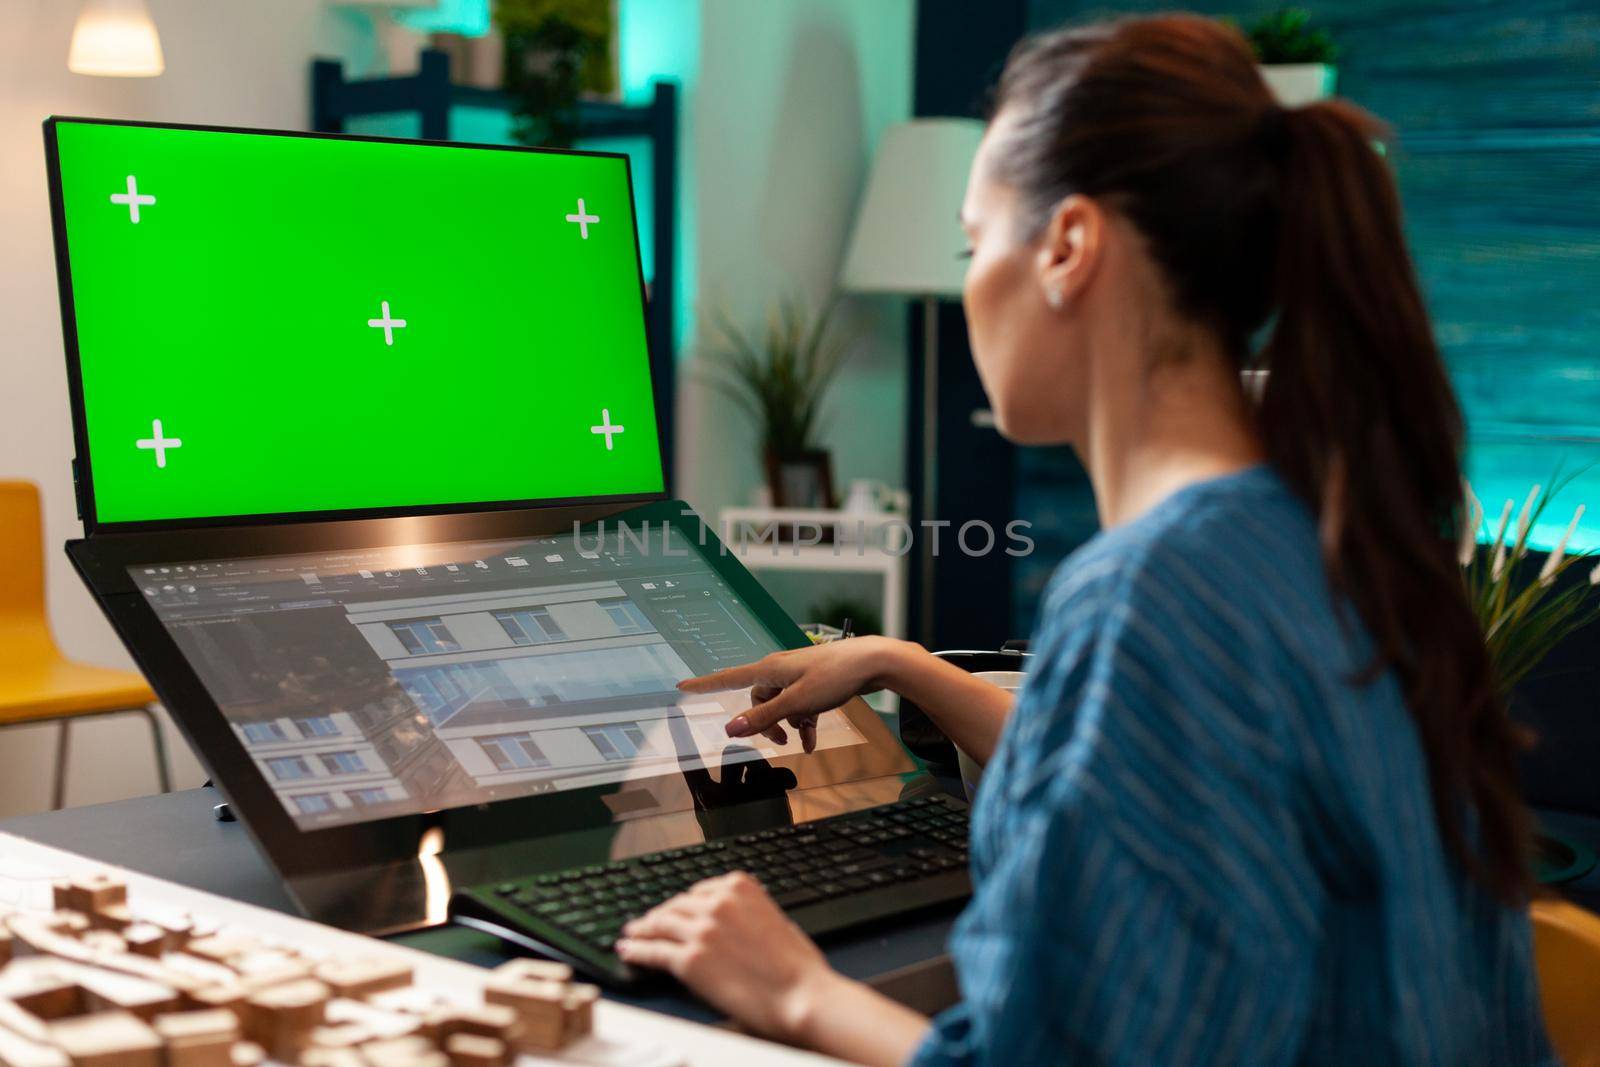 Tehnician woman working on touchpad monitor for design using green screen chroma key mockup isolated background and building plan. Construction expert doing development innovation model